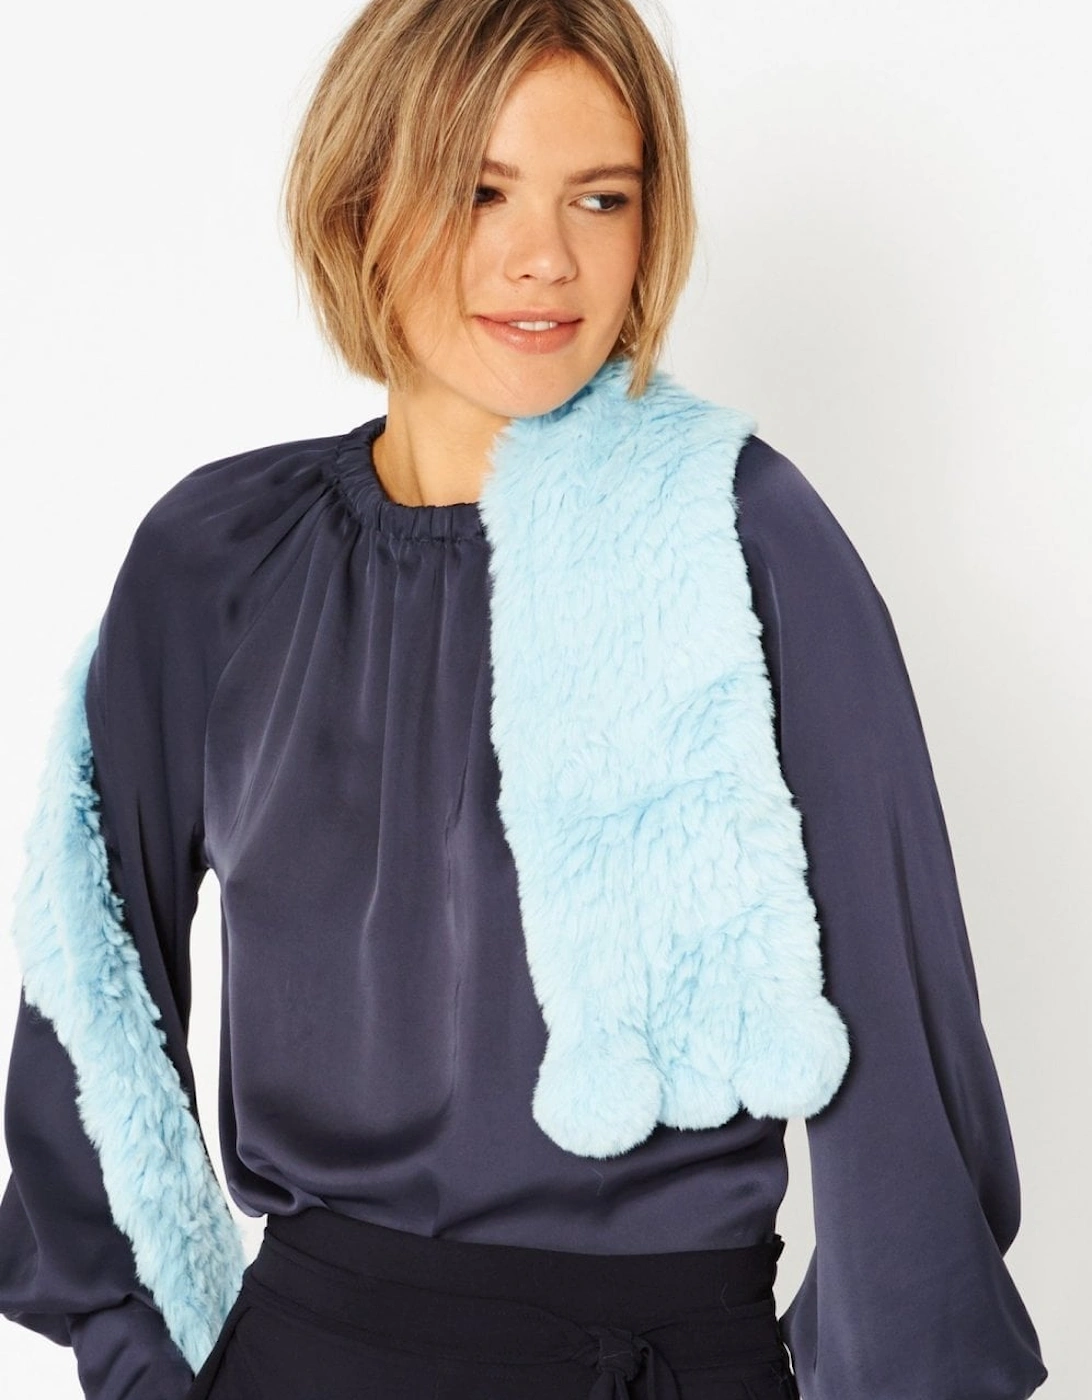 Blue Hand Knitted Faux Fur Scarf